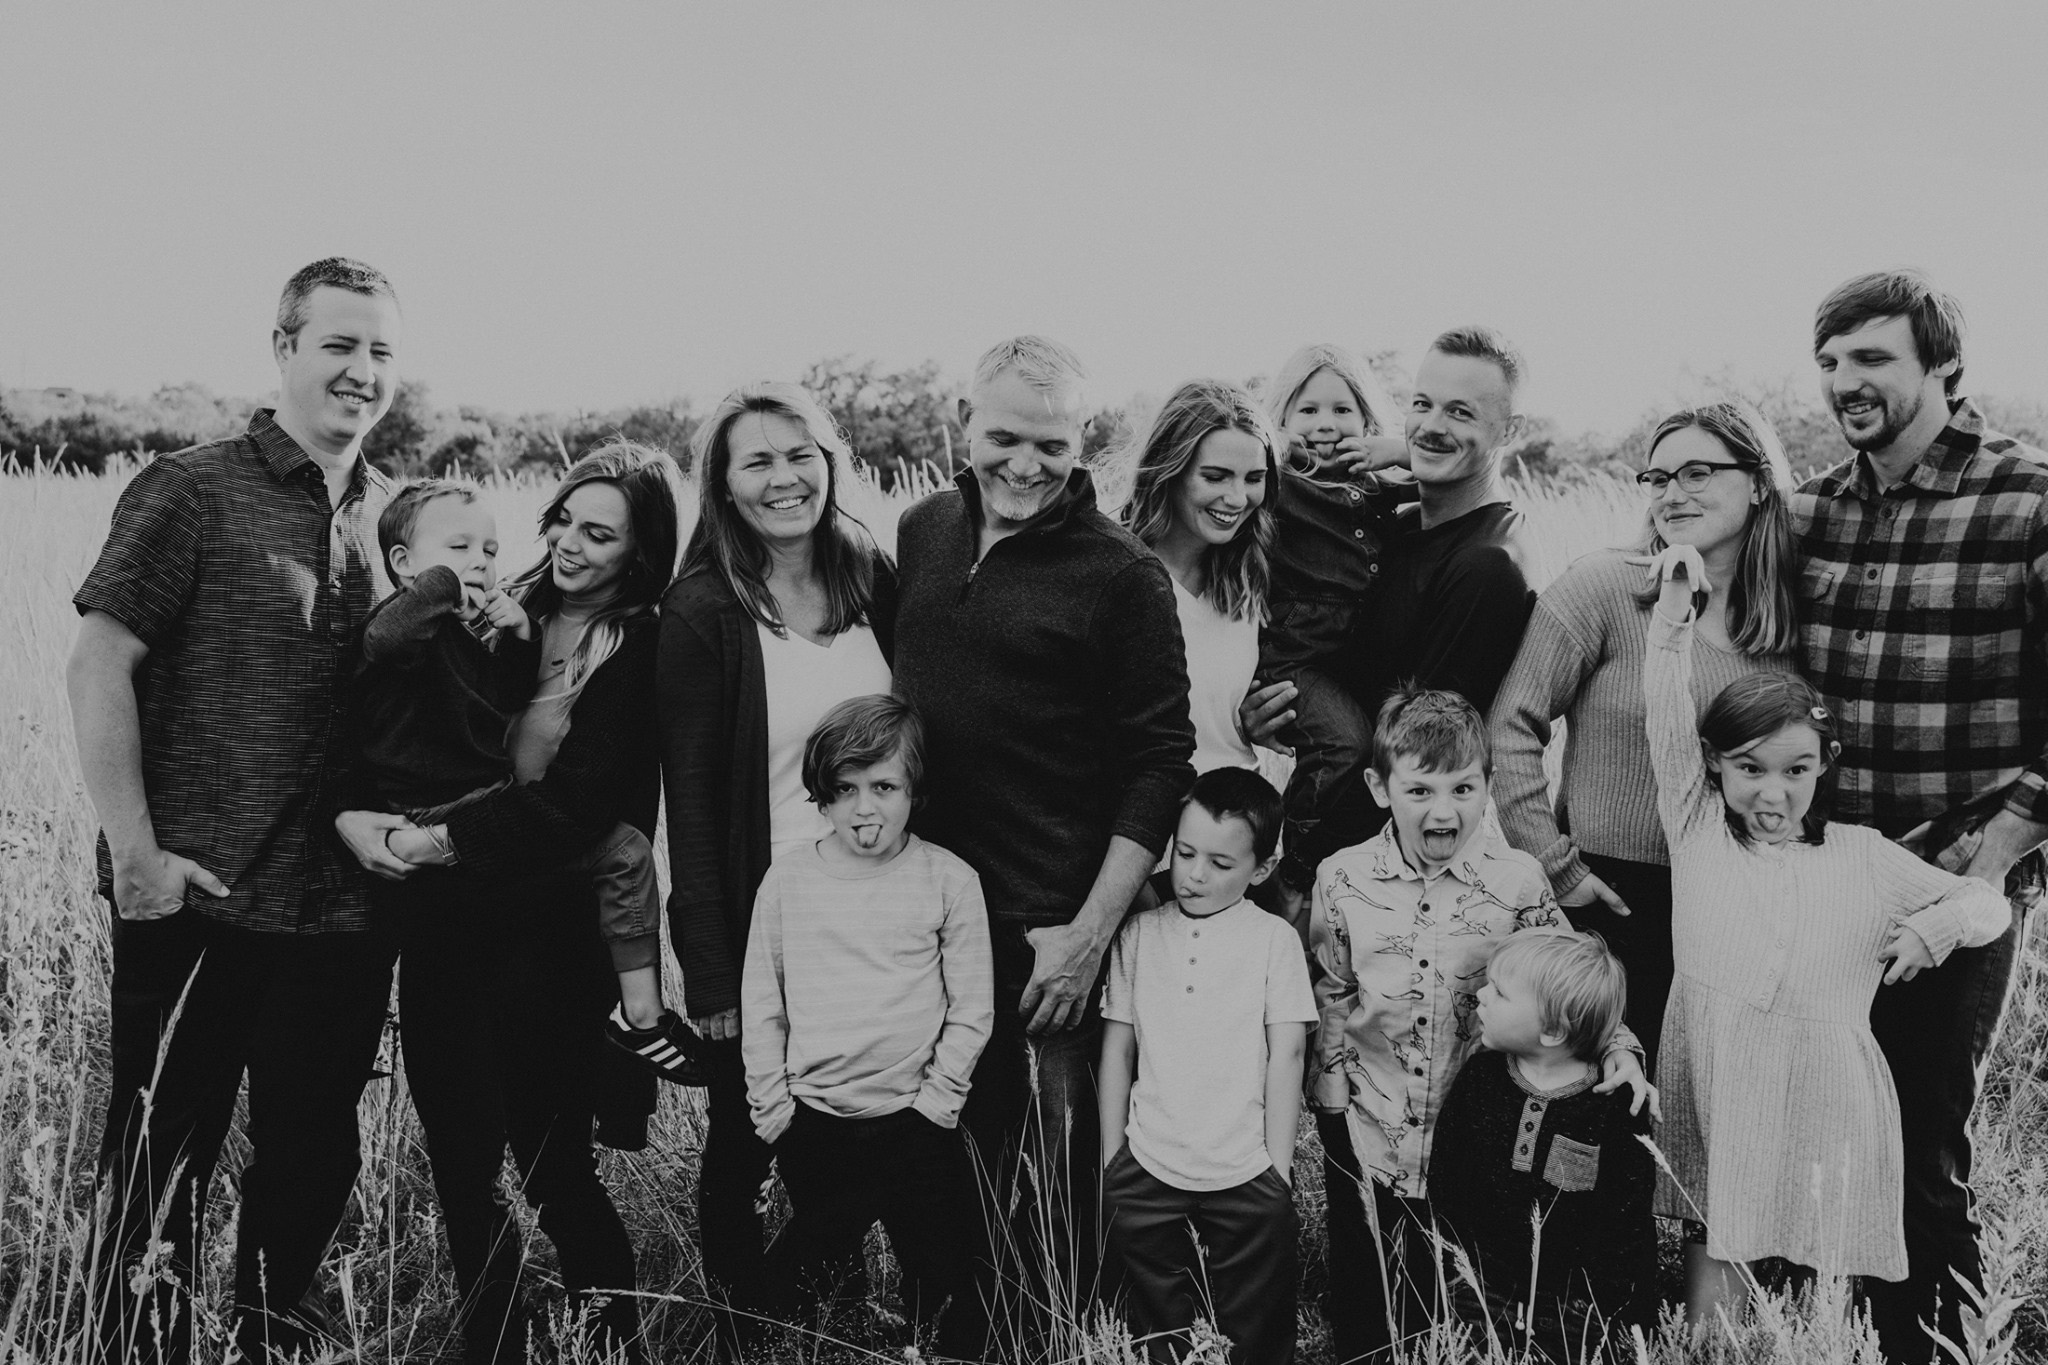 A black and white image of an extended family in a beautiful fall field in Wichita KS by Broom Tree Photo